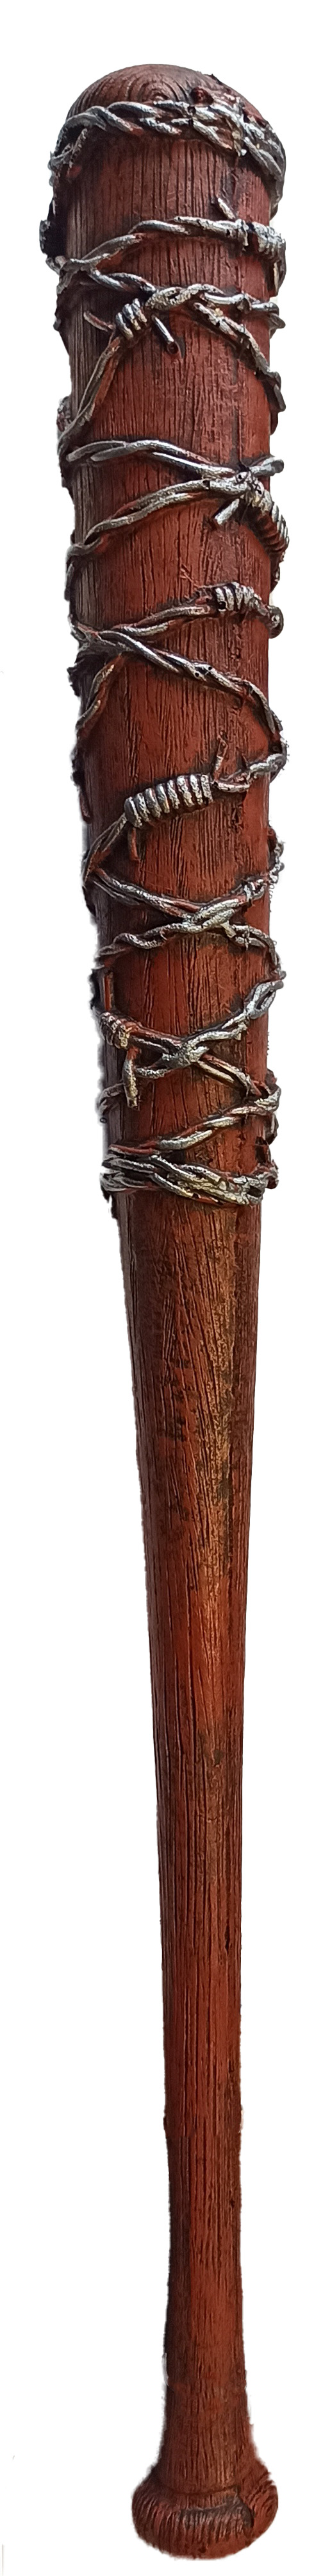 Baseball bat with barbed wire